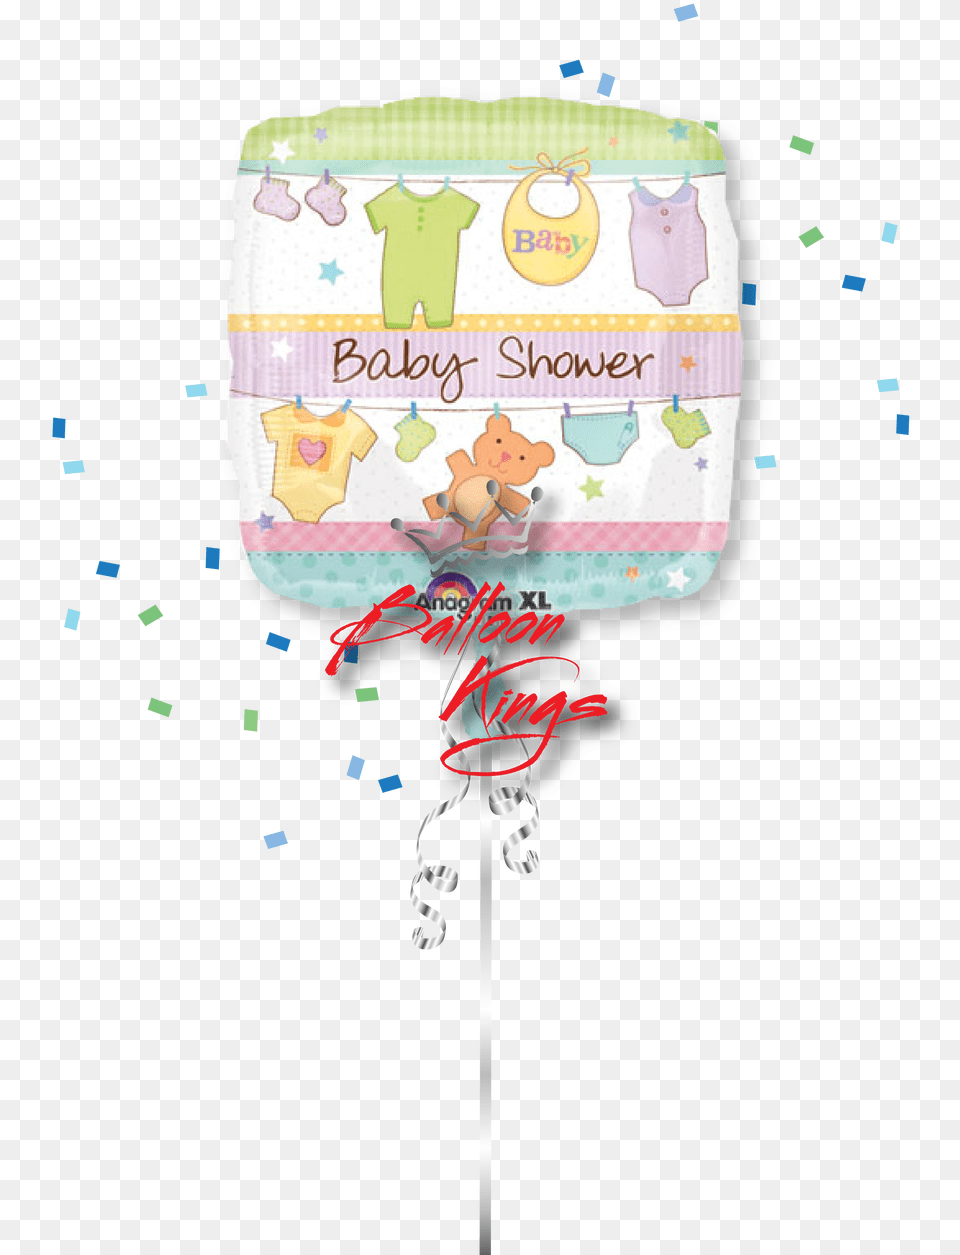 Baby Shower Cuddly Clothesline Anagram 18 Inch Square Foil Balloon Cuddly Clothesline, Diaper, Lamp, Cushion, Home Decor Free Png